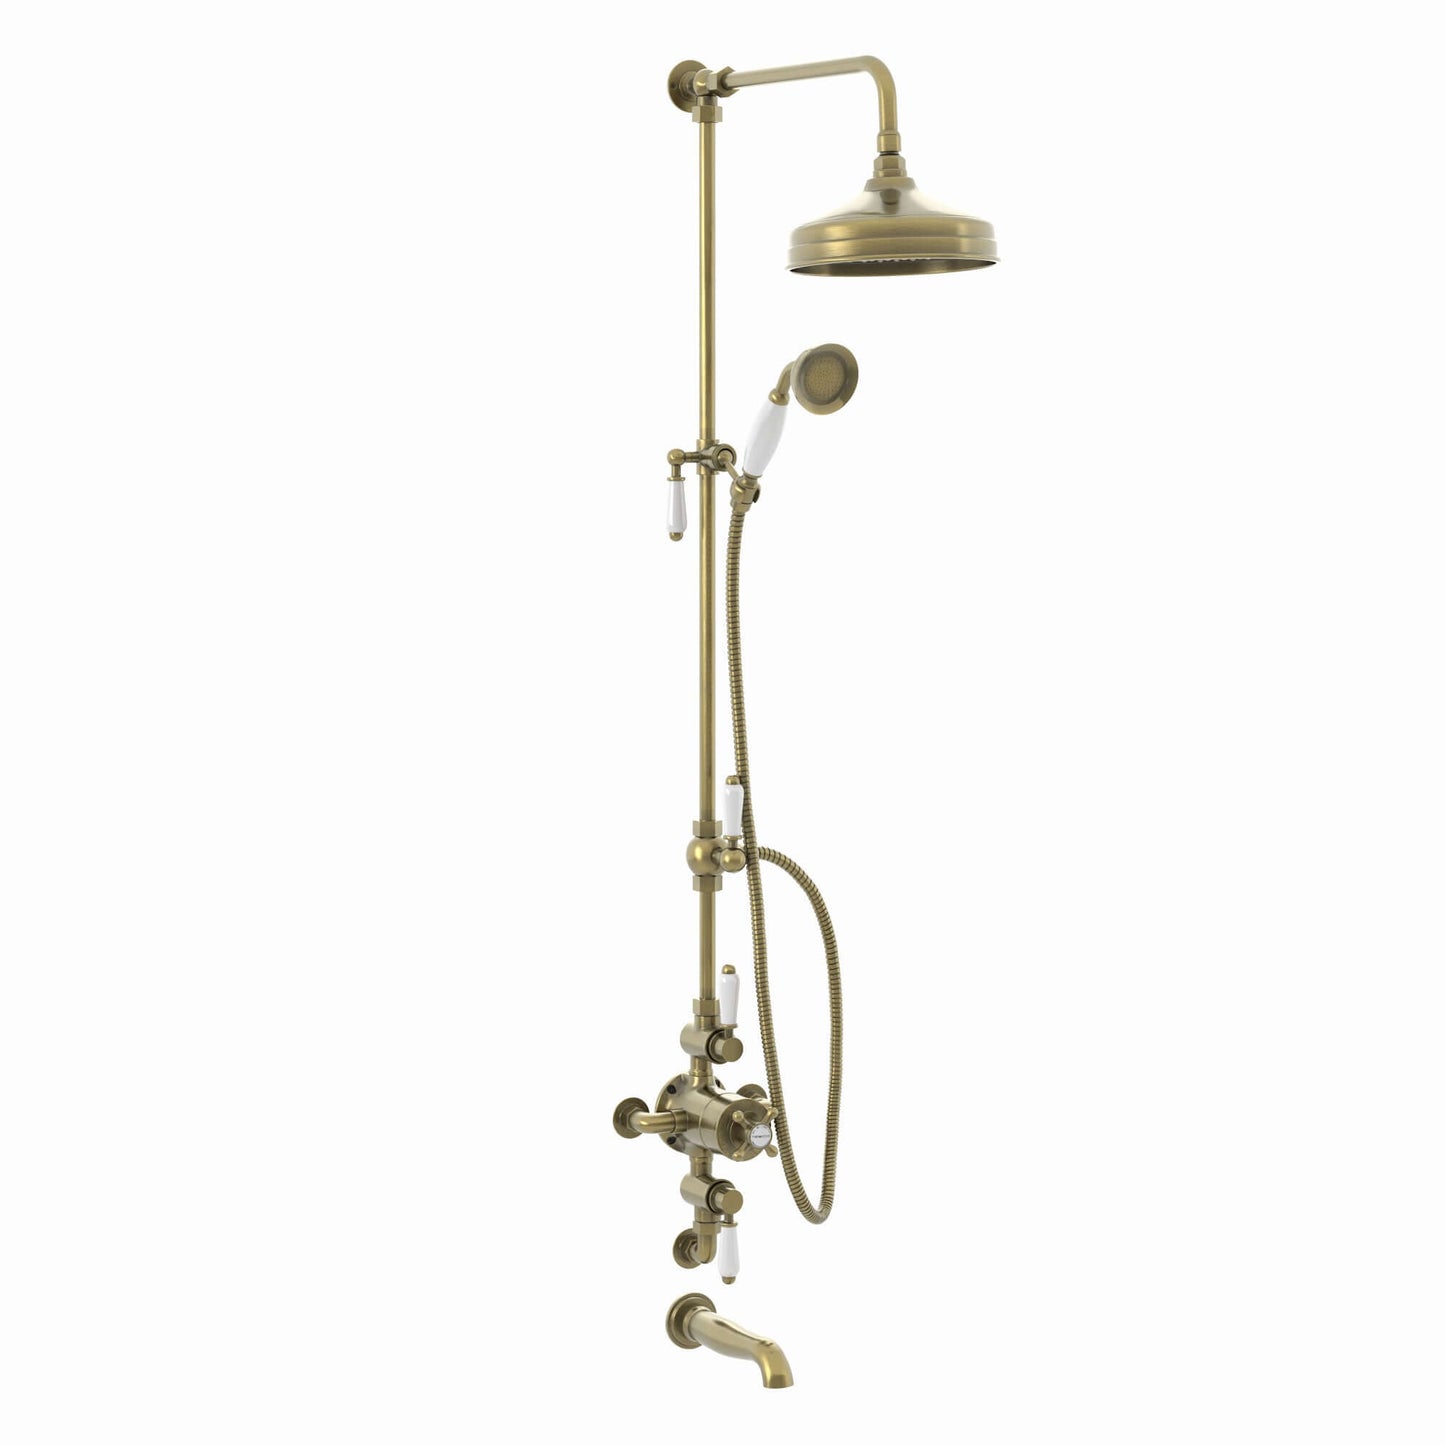 Downton Exposed Traditional Thermostatic Shower Set 3 Outlet, Incl. Triple Shower Valve, Rigid Riser Rail, 200mm Shower Head, Handset & Bath Filler - Antique Bronze And White - Showers